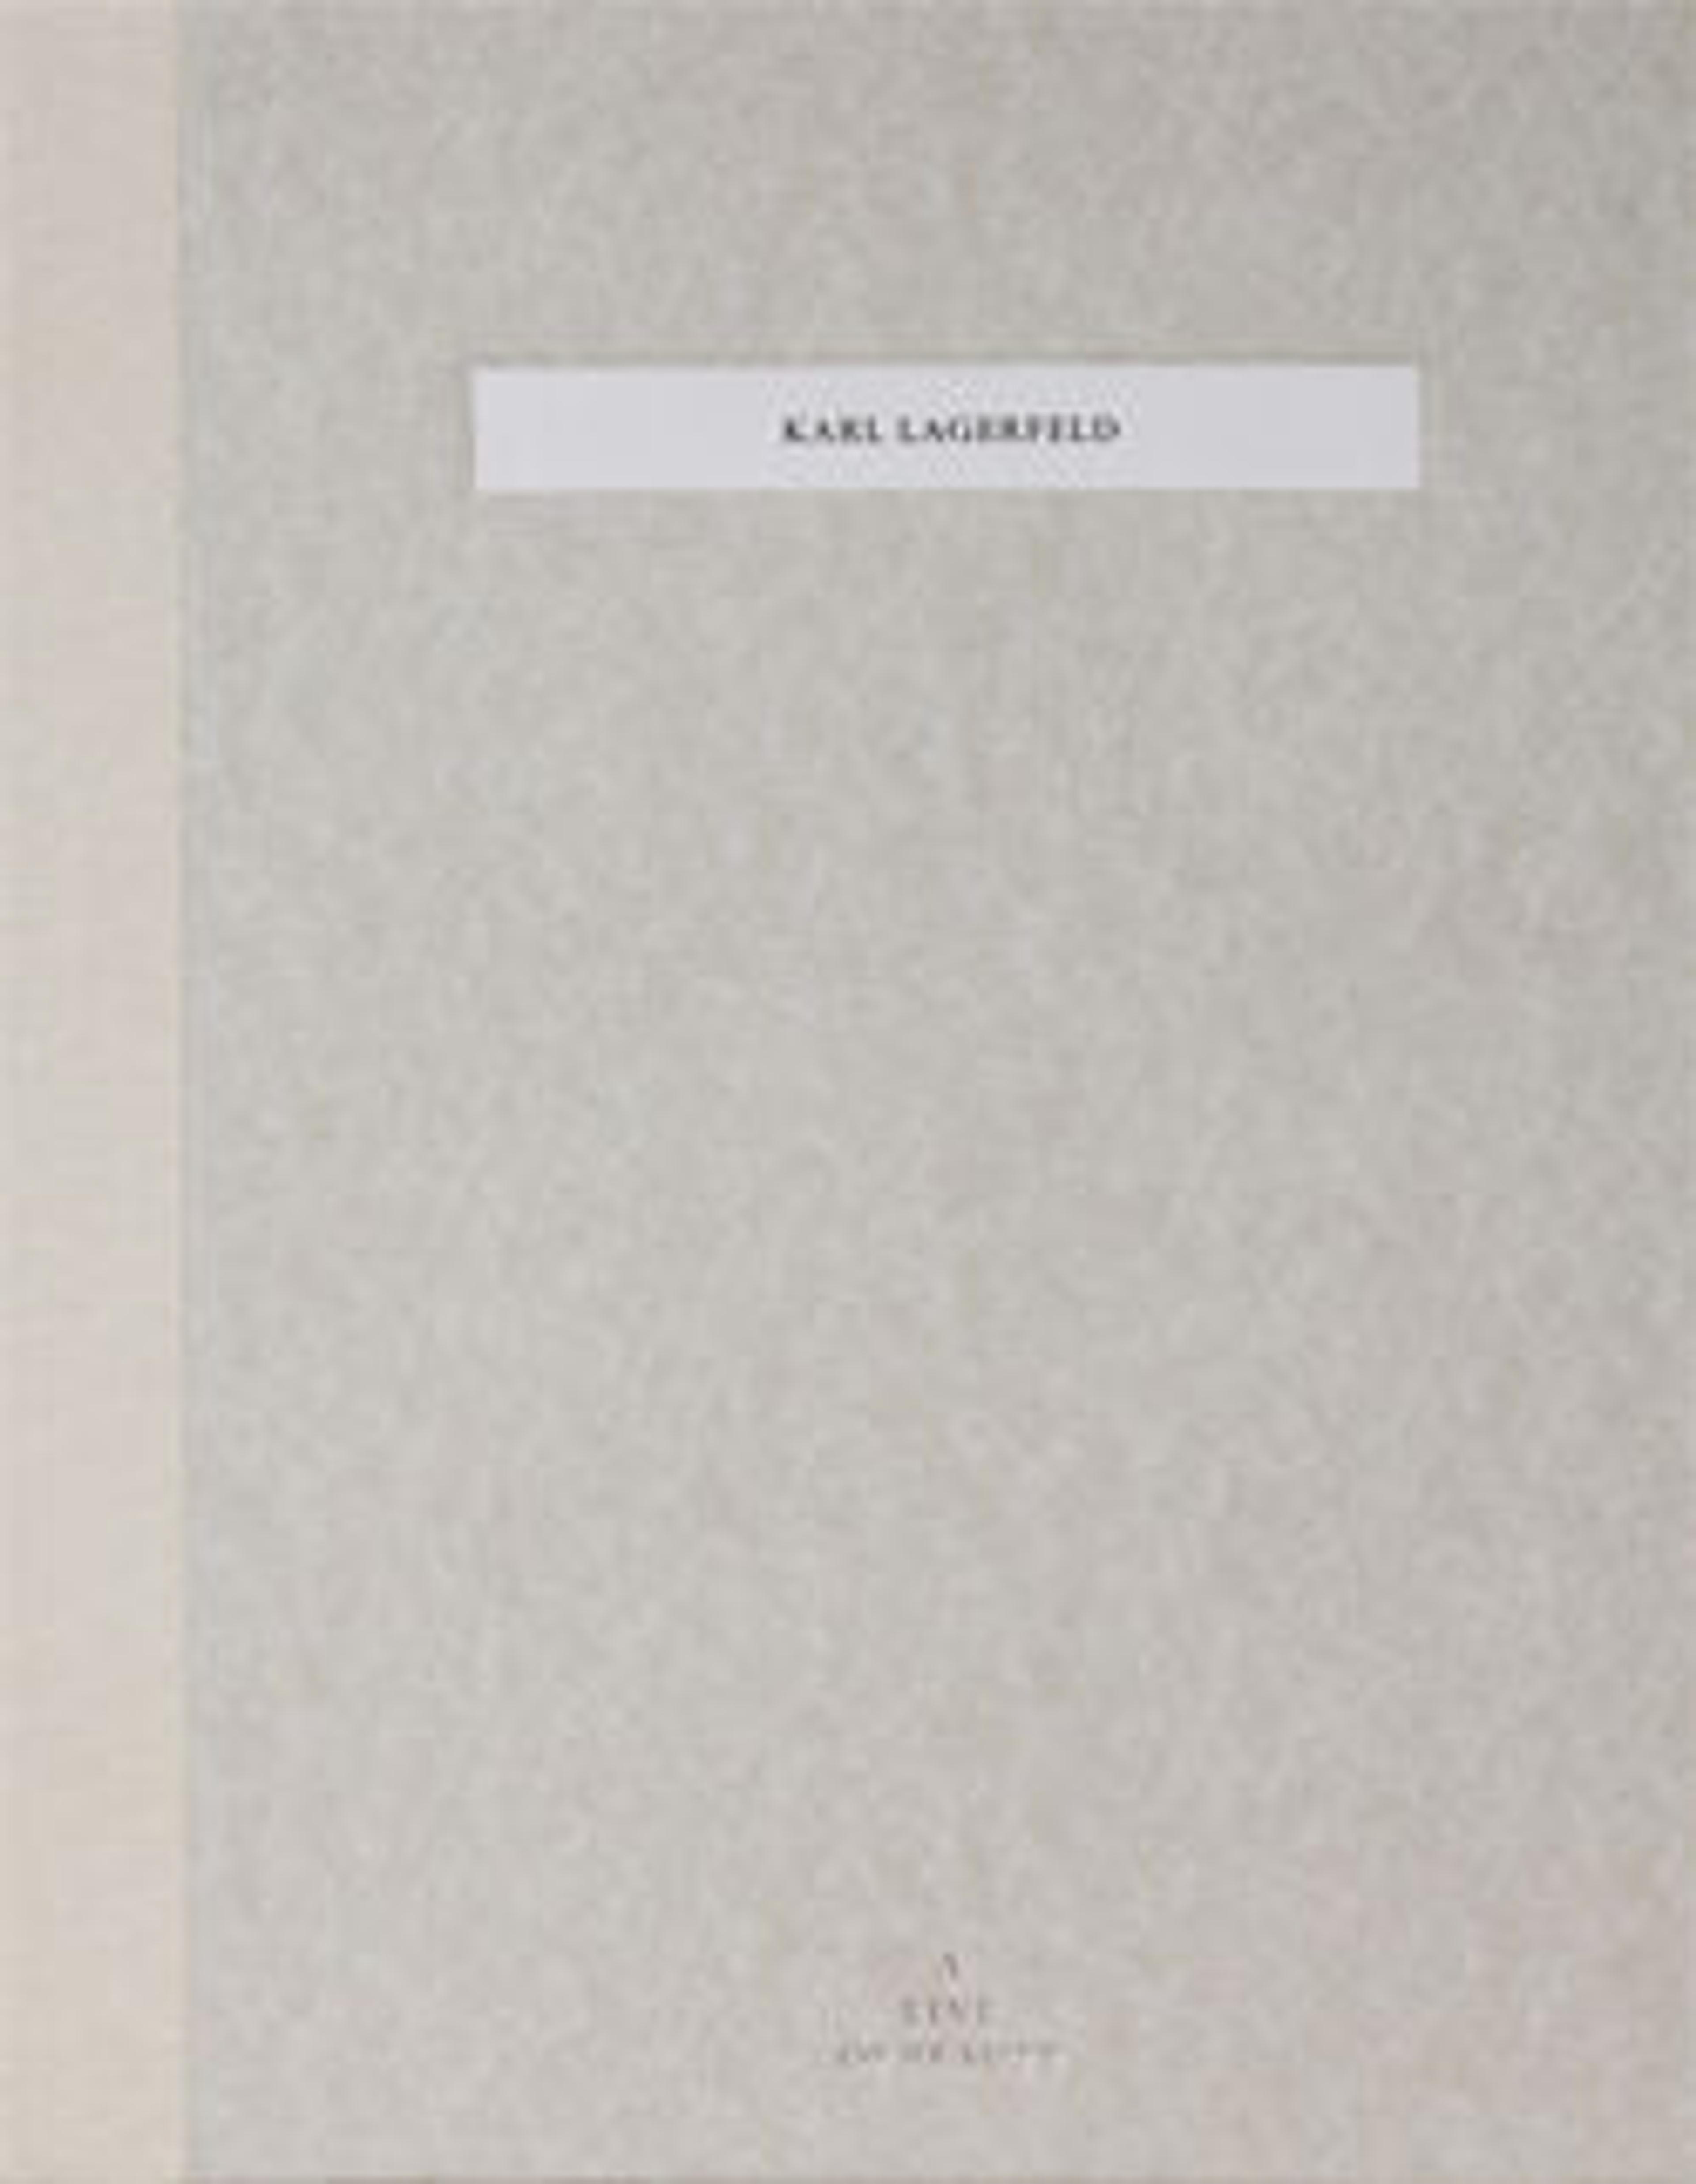 a gray marbled cover reading "Karl Lagerfeld" near the top and "A Line of Beauty" near the bottom